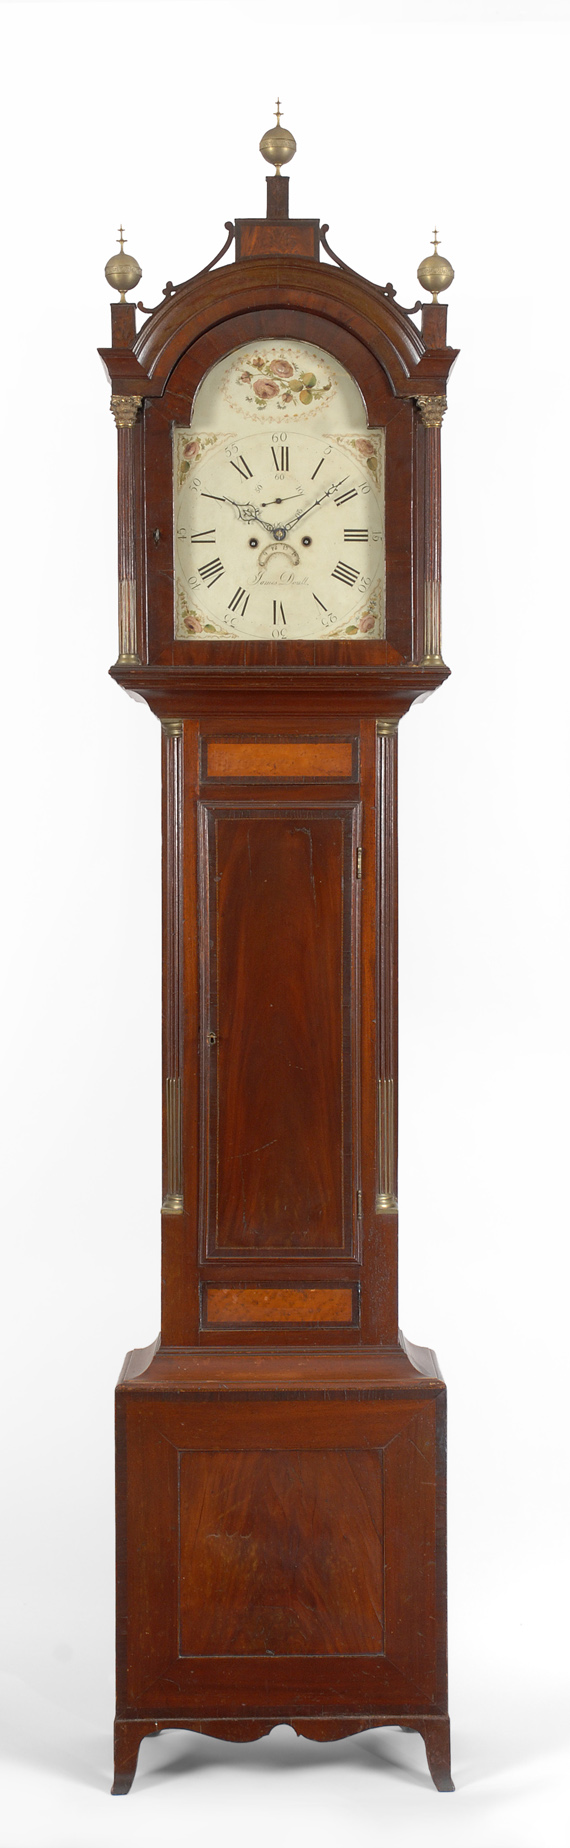 An important Hepplewhite tall case clock, by James Doull, Charlestown, Massachusetts.  The case attributed to the school of Thomas Seymour, Boston, circa 1815-20.